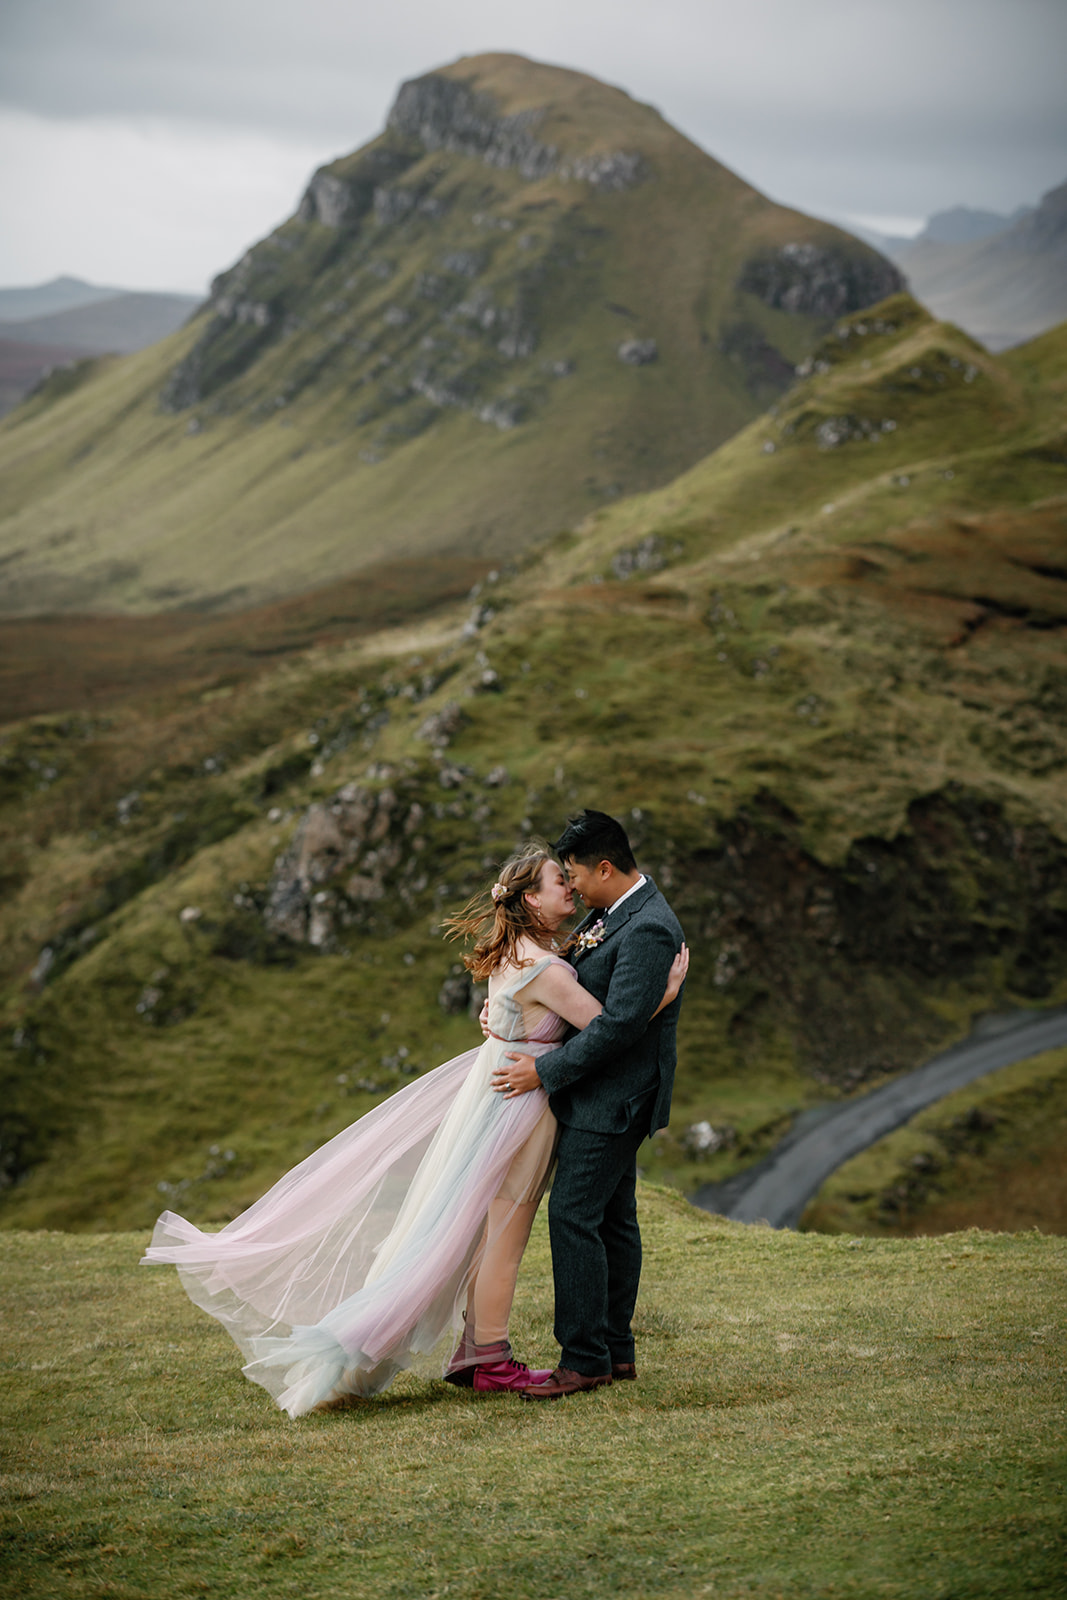 Mellie and Andrew shared an intimate moment with the majestic view of Quiraing, Isle of Skye as their backdrop